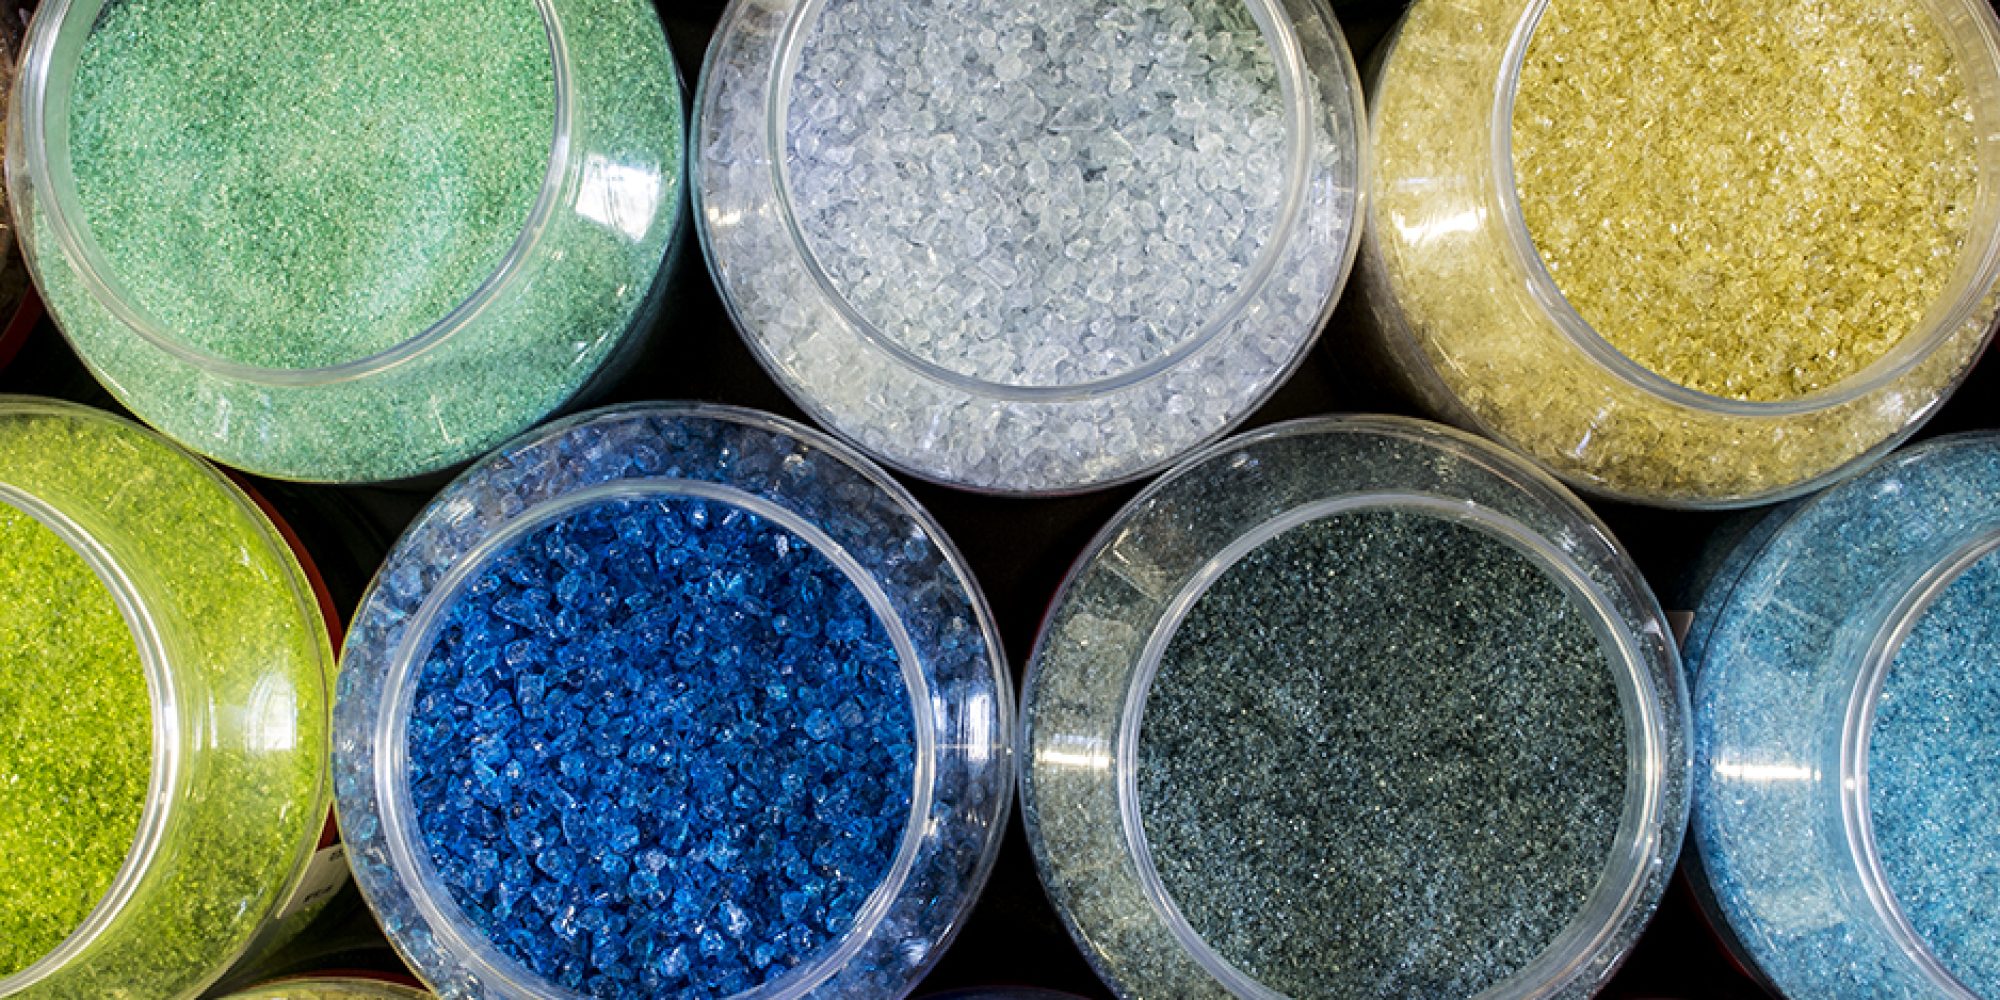 Frit is ground glass that comes in 4 sizes ranging from fine powder to coarse pebbles